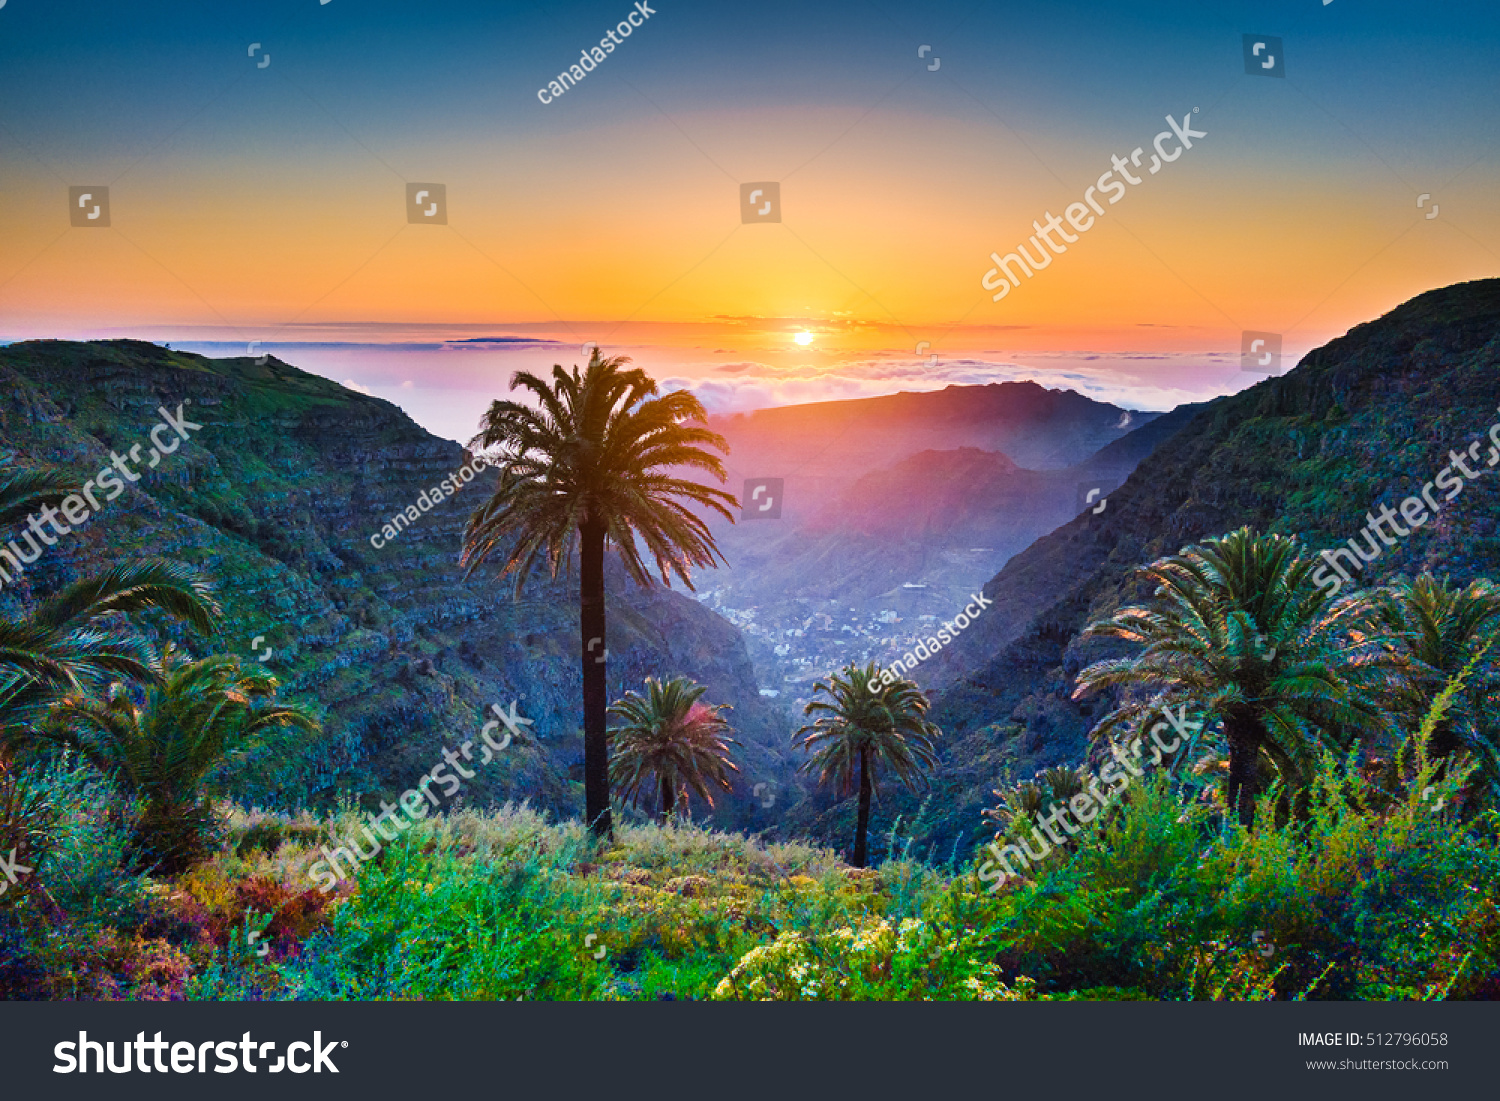 Beautiful view of amazing tropical scenery with exotic palm trees and mountain valleys above wide open sea in golden evening light at sunset with blue sky and clouds in summer, Canary Islands, Spain #512796058